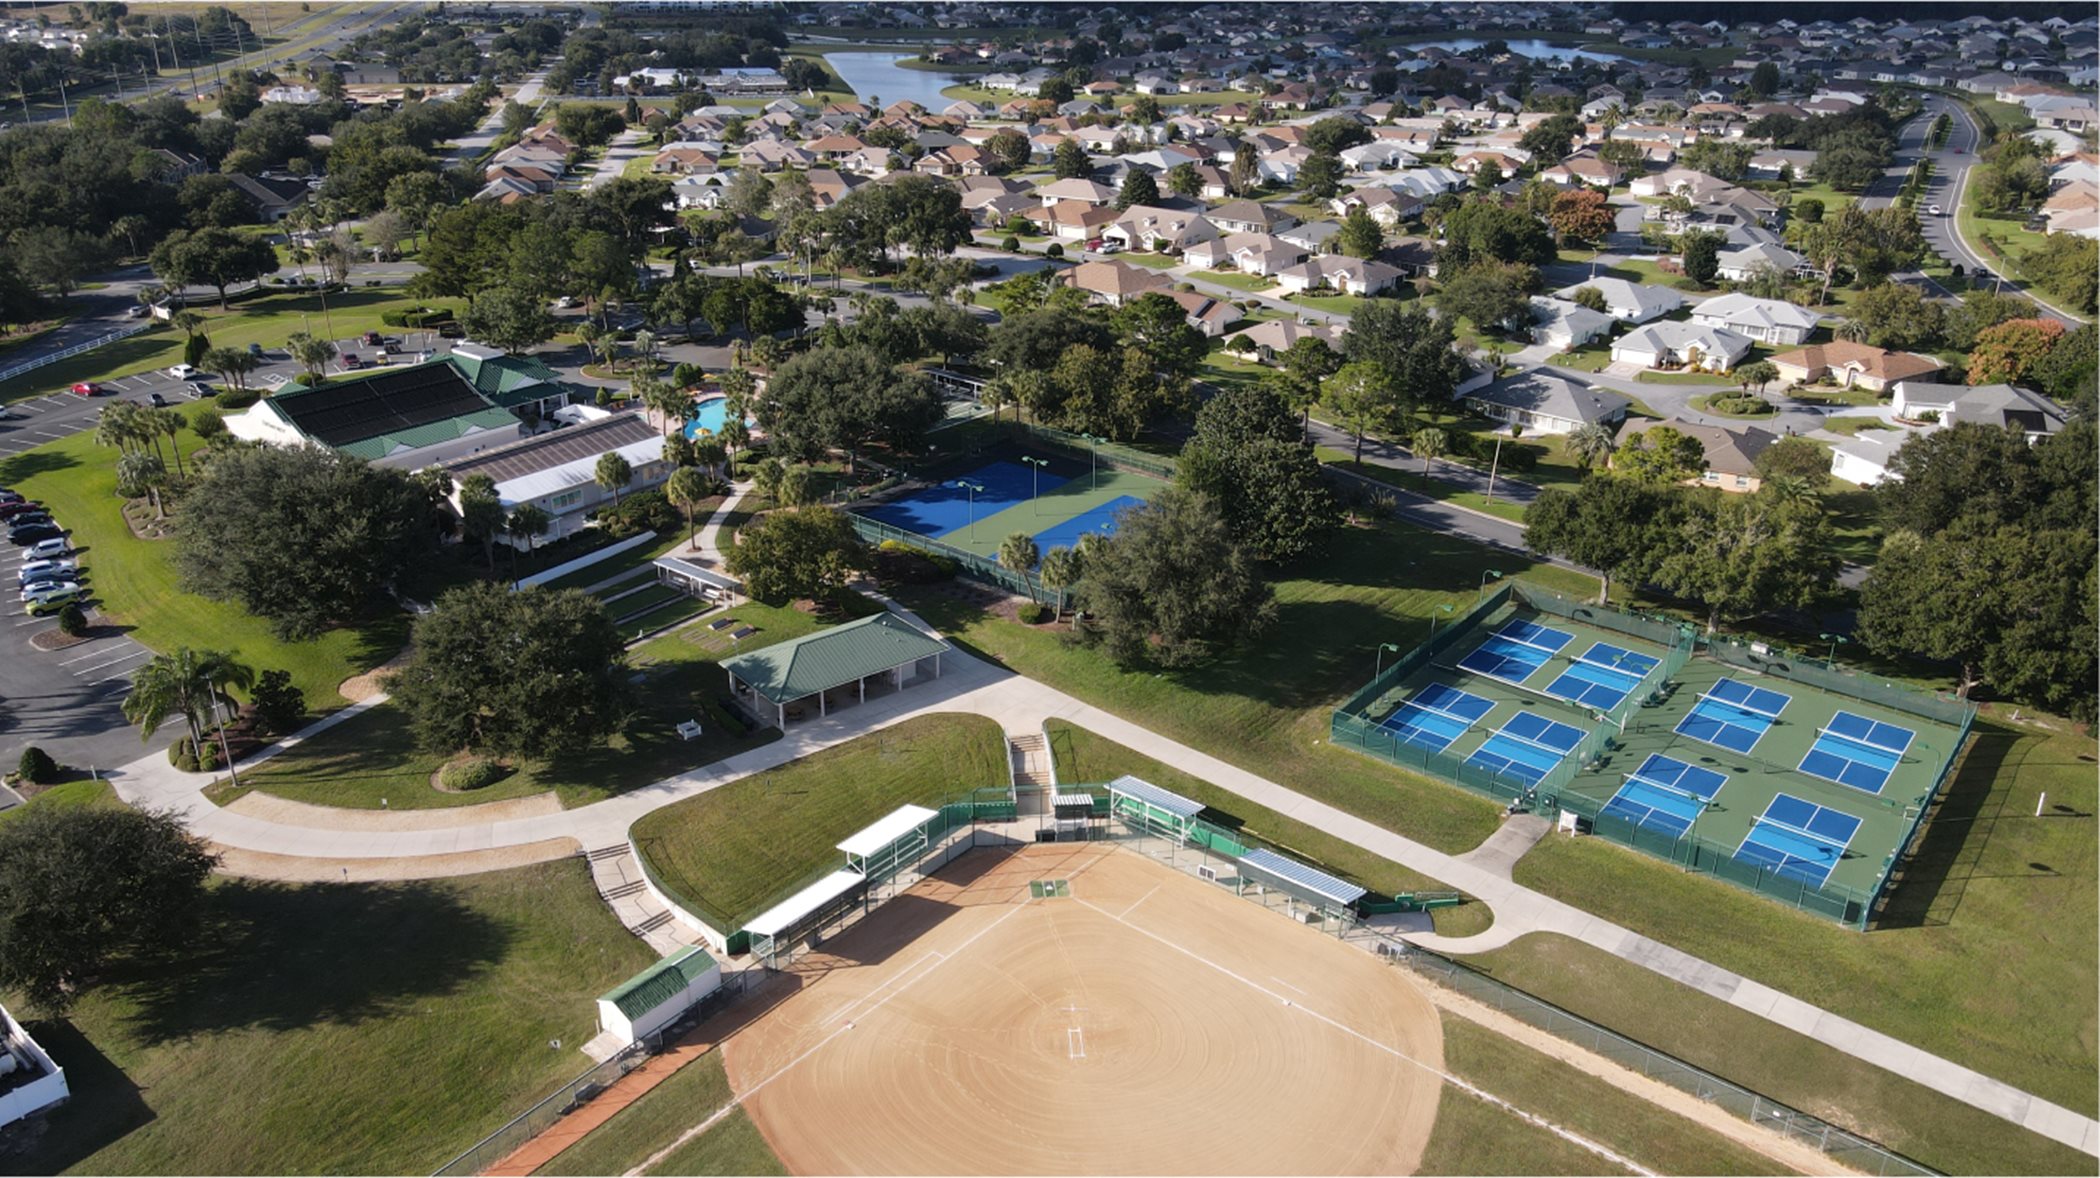 Drone shot of baseball field and sports courts